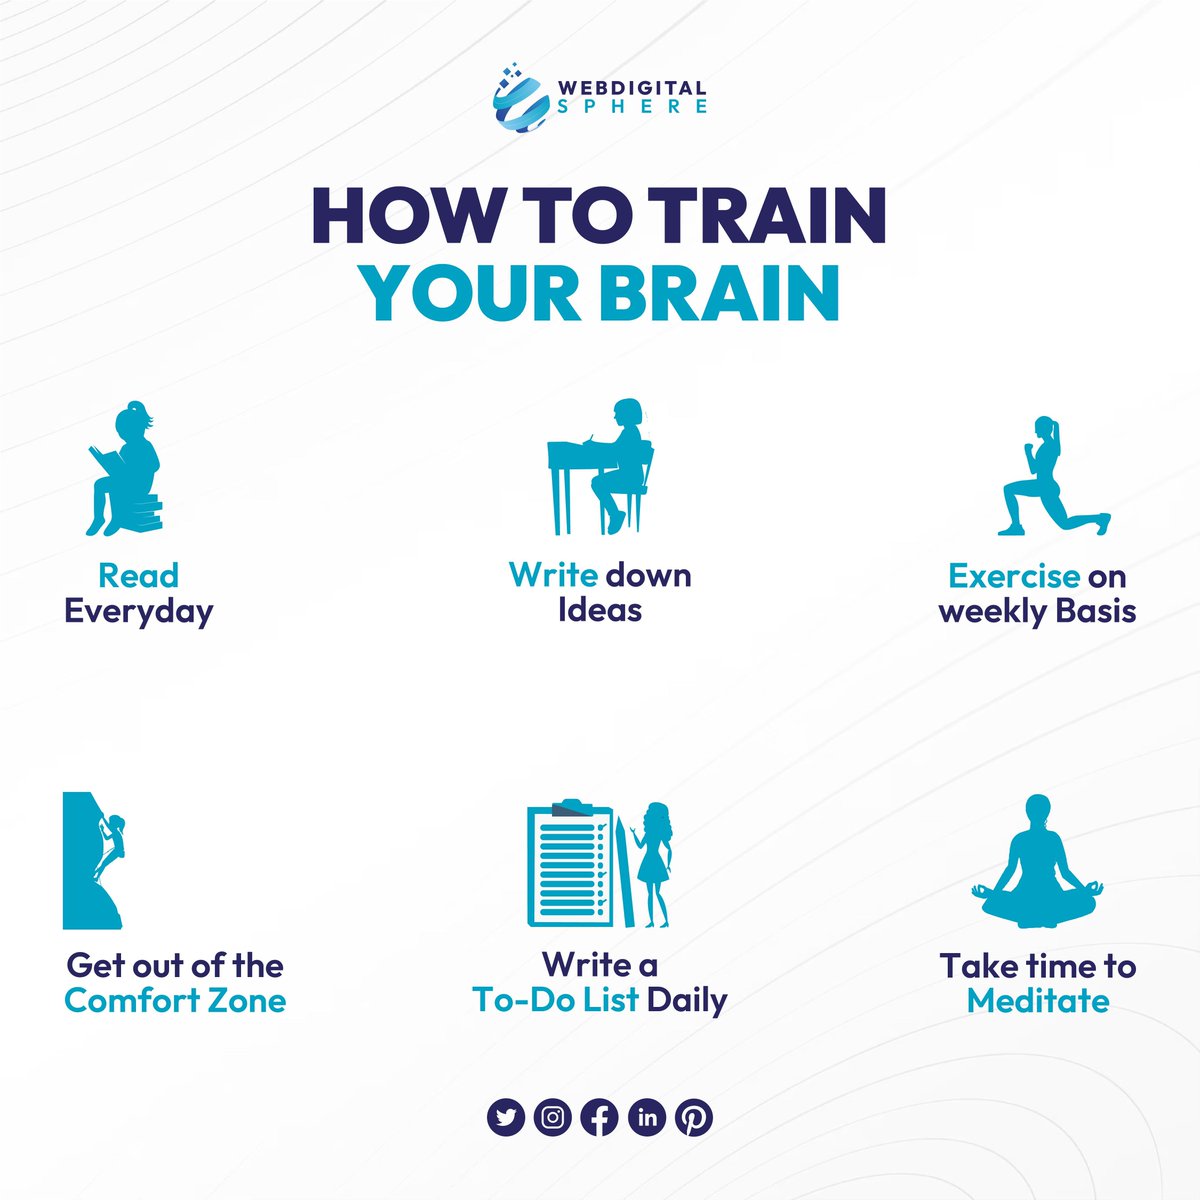 Transform your brain with these simple daily practices! 
_
#motivation #motivationalquotes #motivationmonday #motivationquotes  #motivation101 #morningmotivation #dreambig #hardworkpaysoffs #successmindset #selfgrowth #journey2success #newweeknewgoals